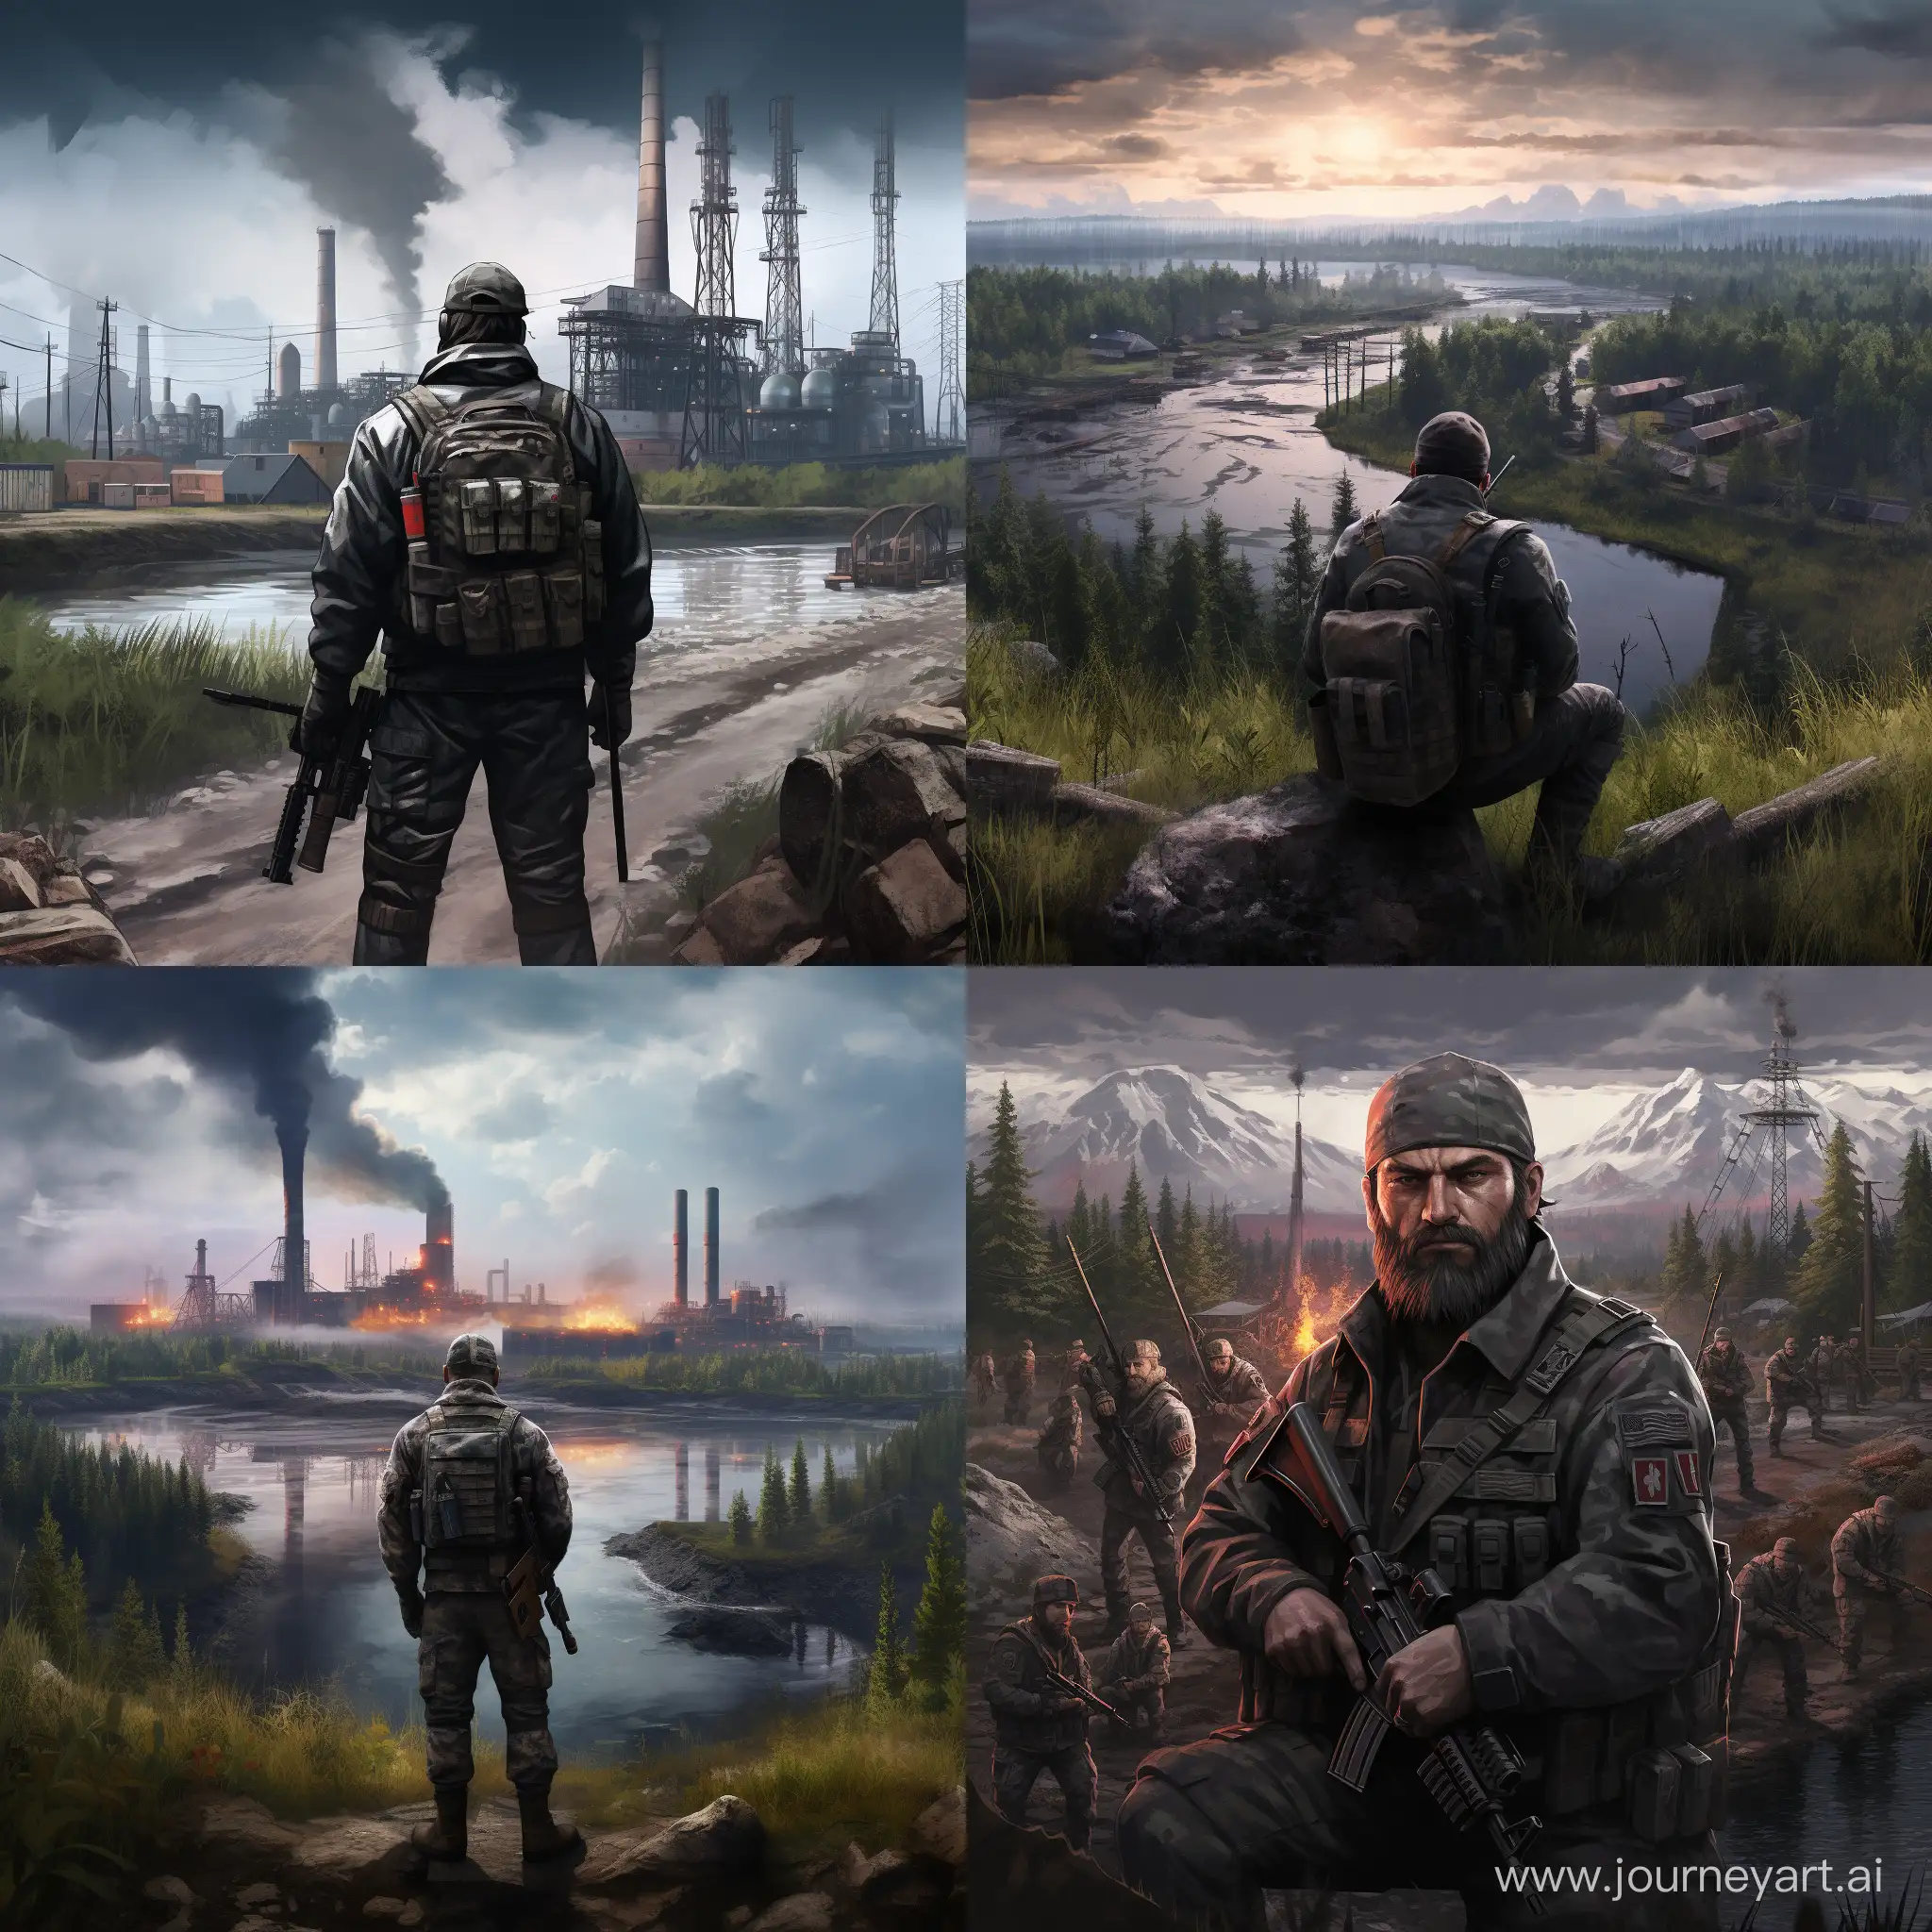 the game "escape from Nizhnekamsk" cover from the game escape from Tarkov 4к realism